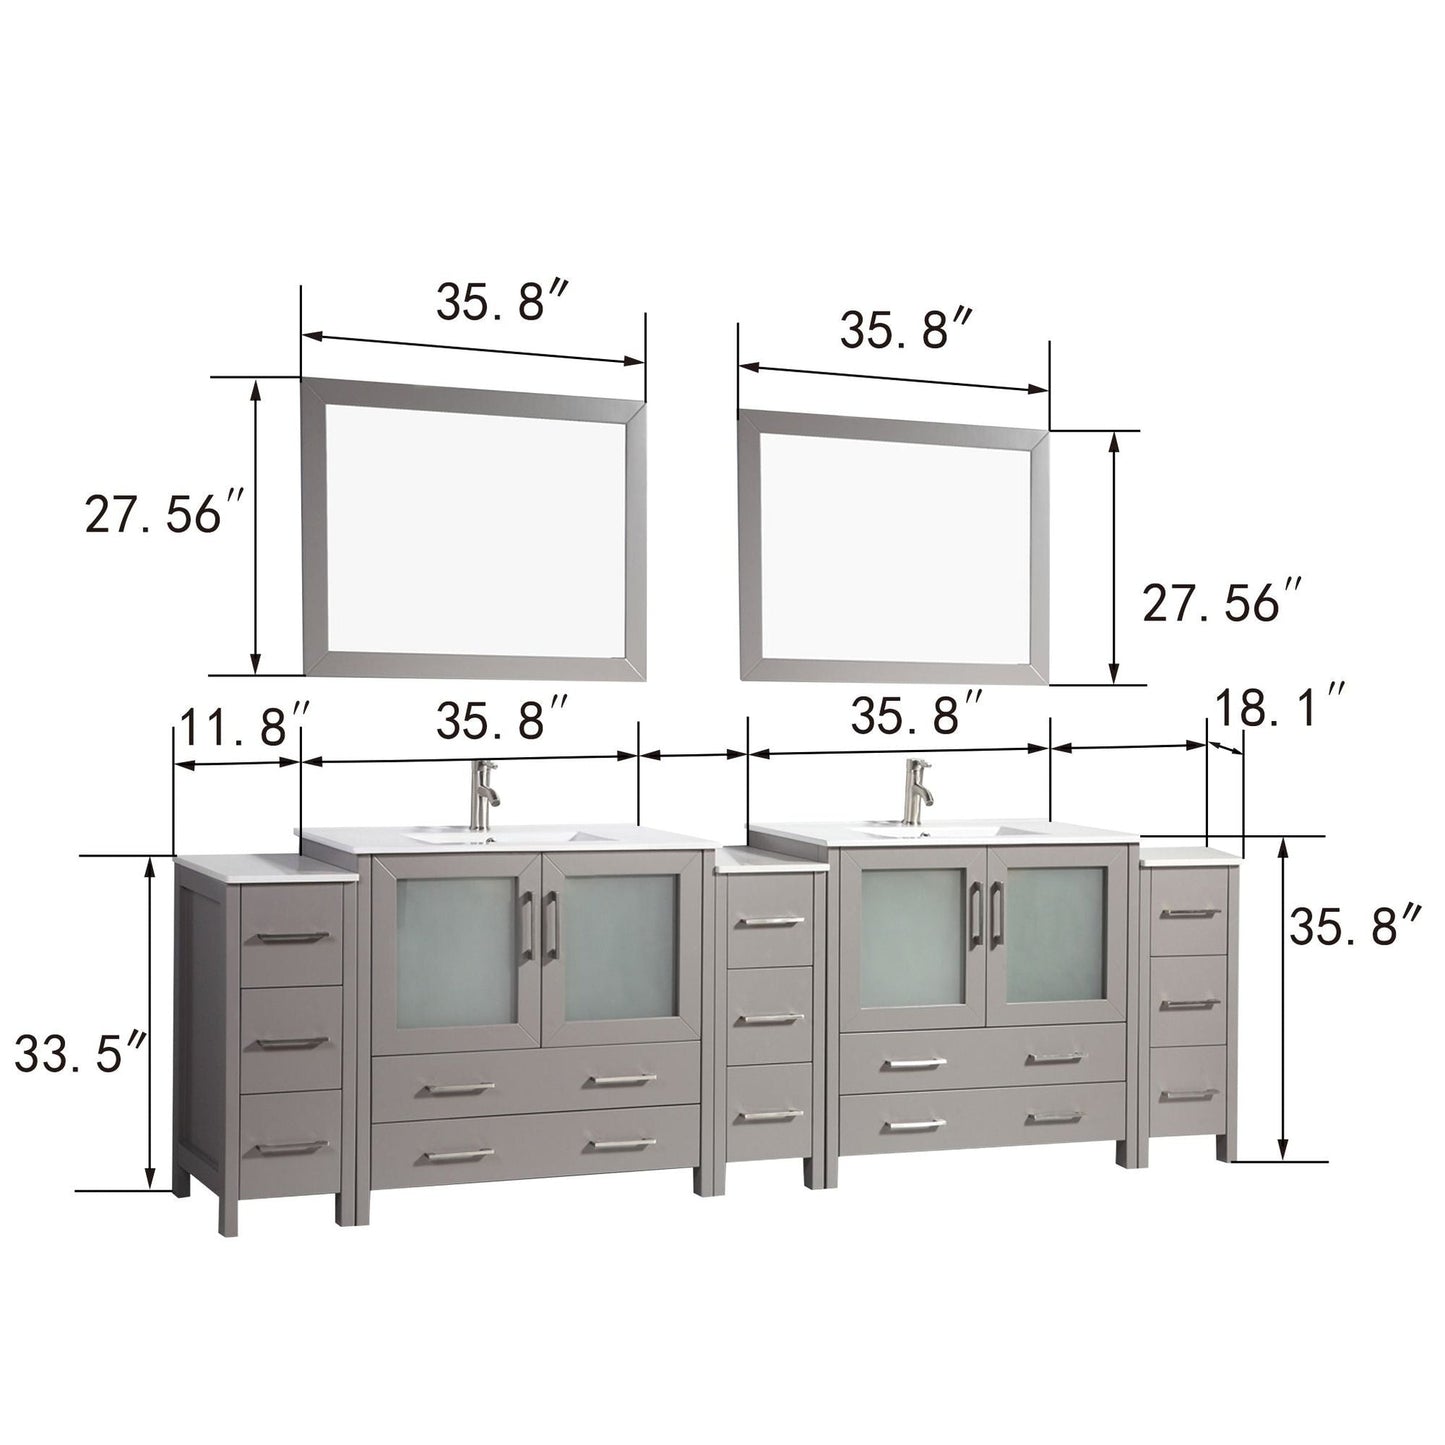 Vanity Art Brescia 108" Double Gray Freestanding Modern Bathroom Vanity Set With Integrated Ceramic Sink, 2 Shelves, 13 Dovetail Drawers and 2 Mirrors